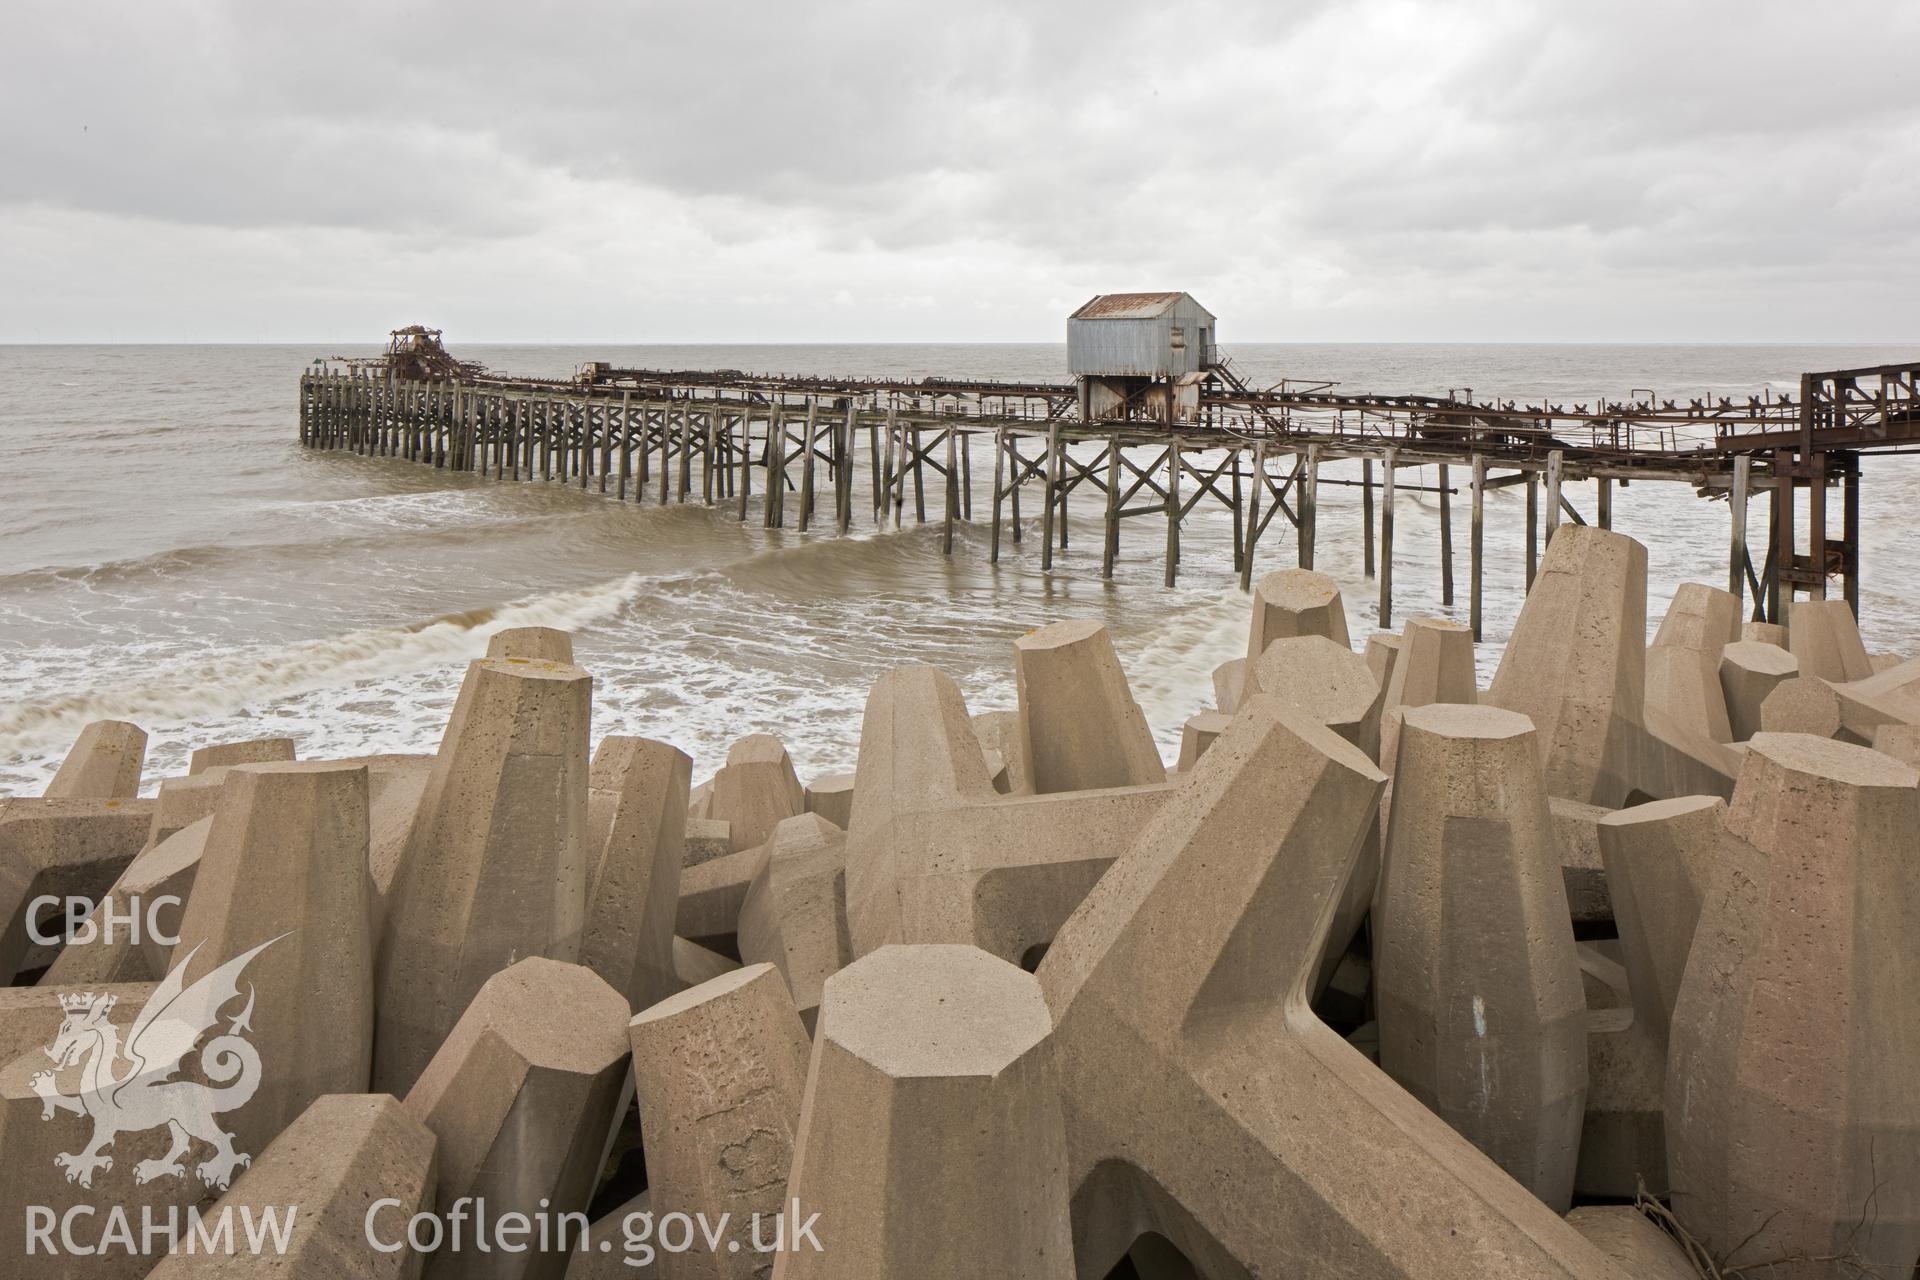 Jetty from the west, coastal erosion protection bollards in foreground.